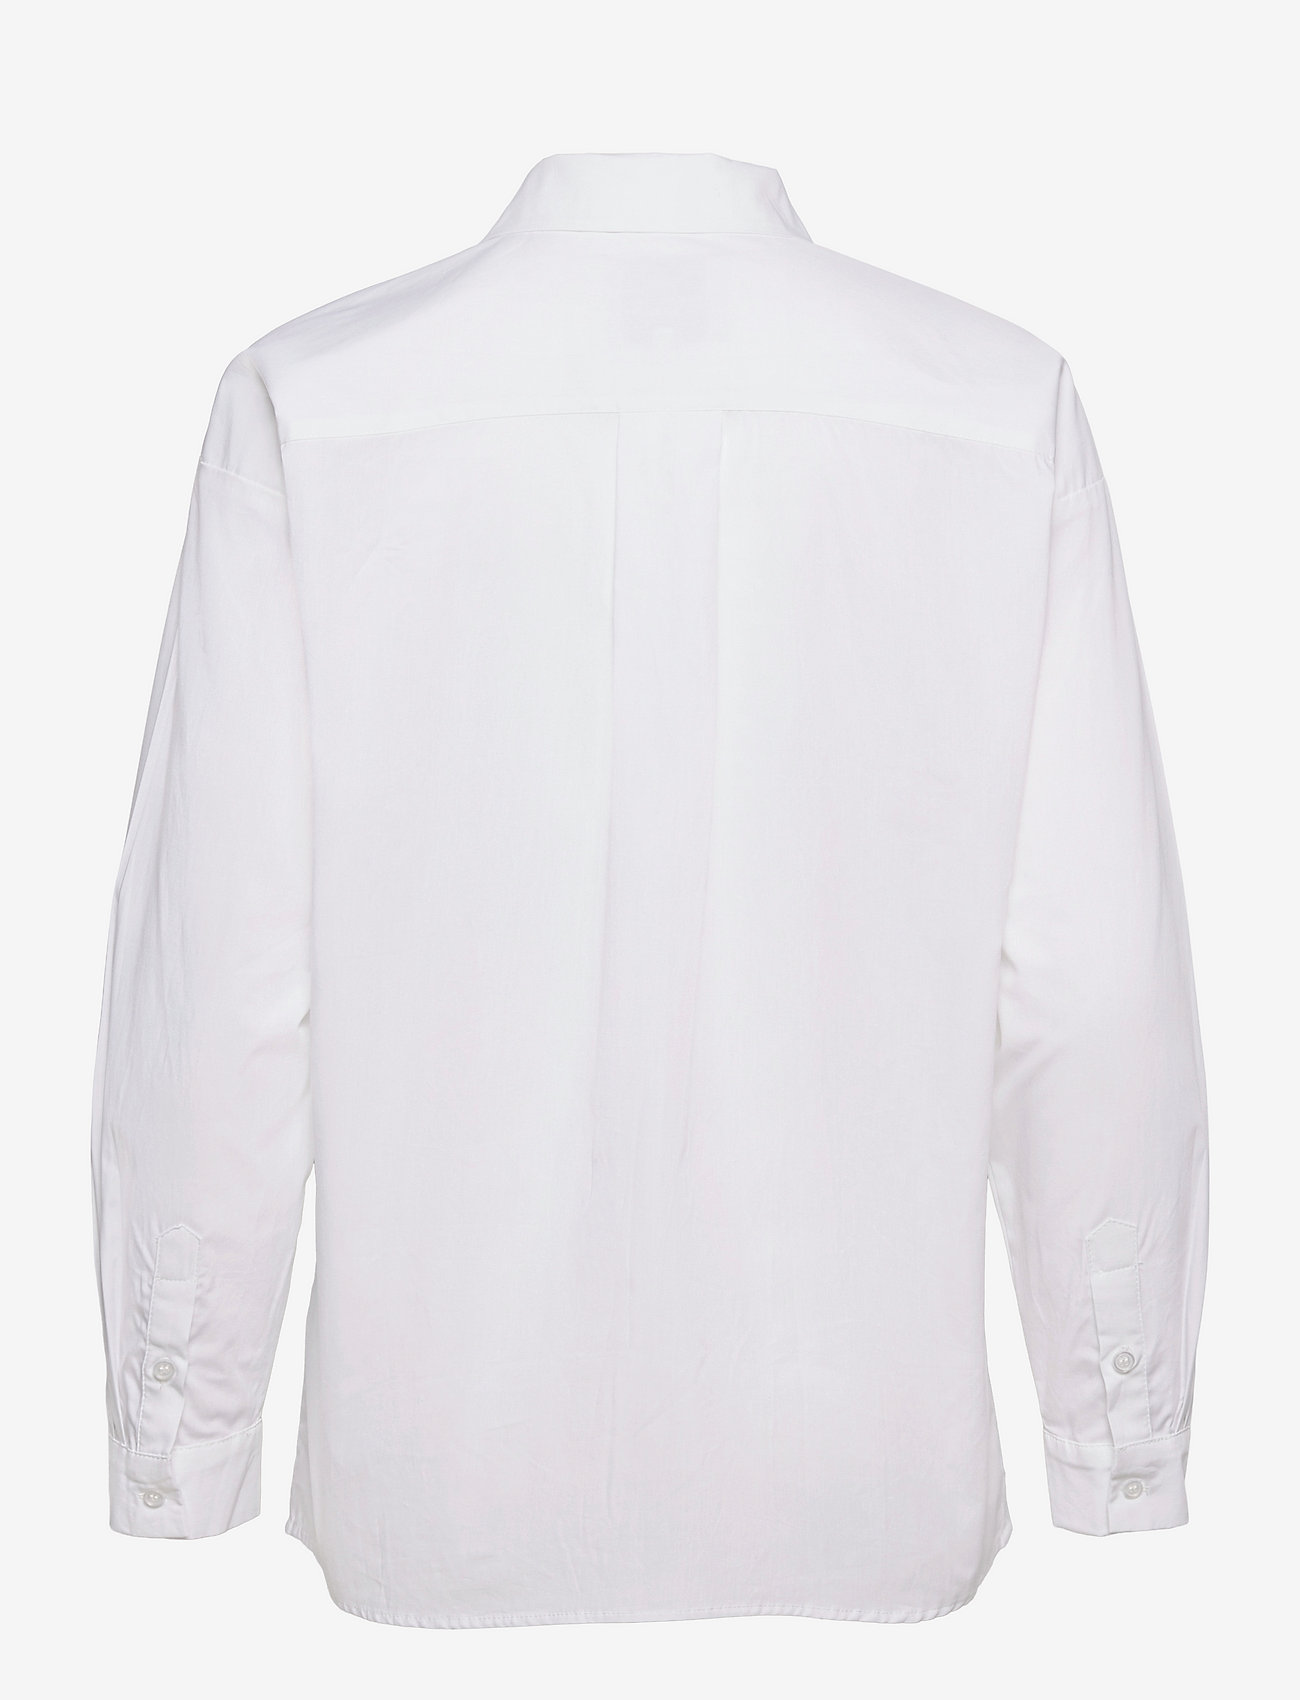 My Essential Wardrobe - 03 THE SHIRT - long-sleeved shirts - bright white - 1